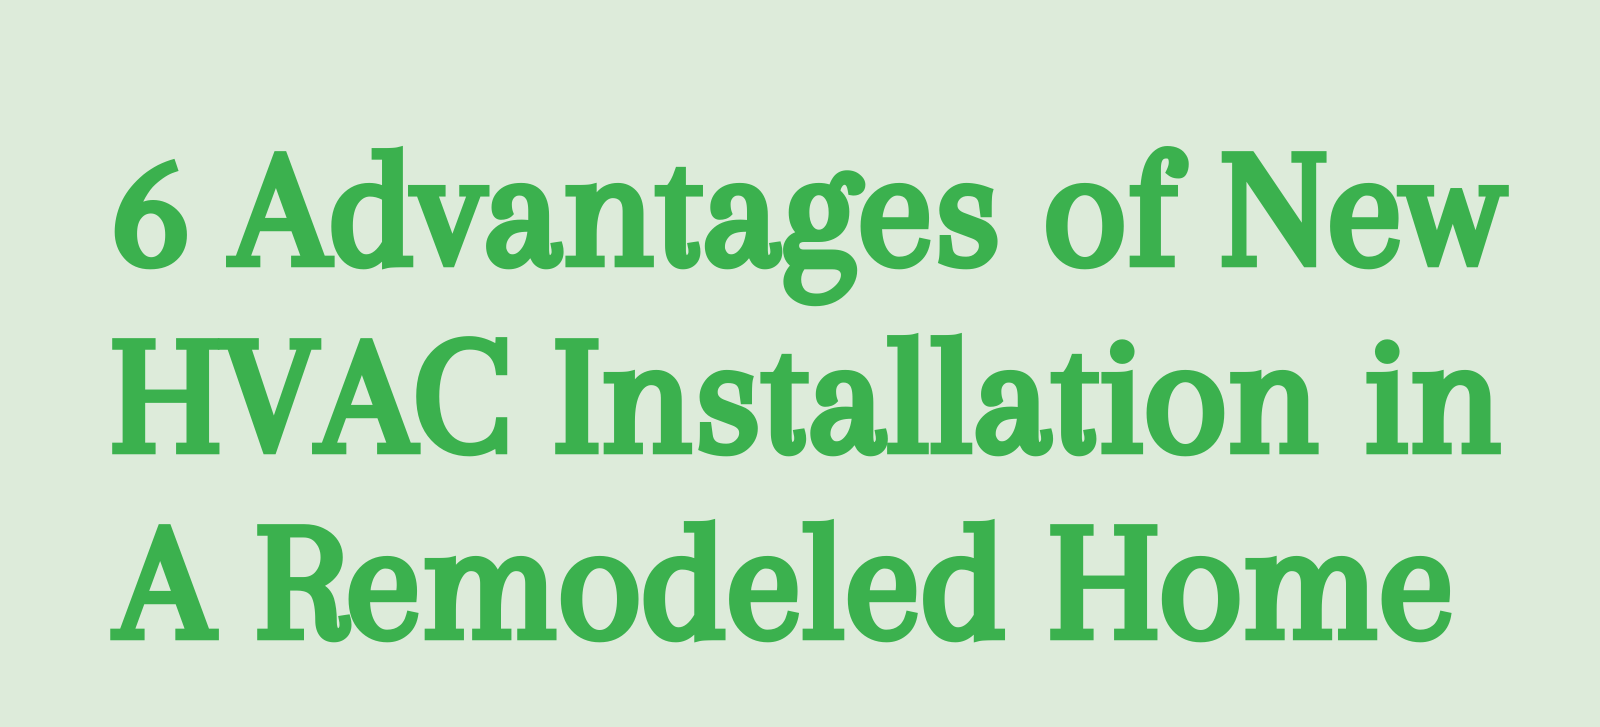 6 Advantages of New HVAC Installation in A Remodeled Home